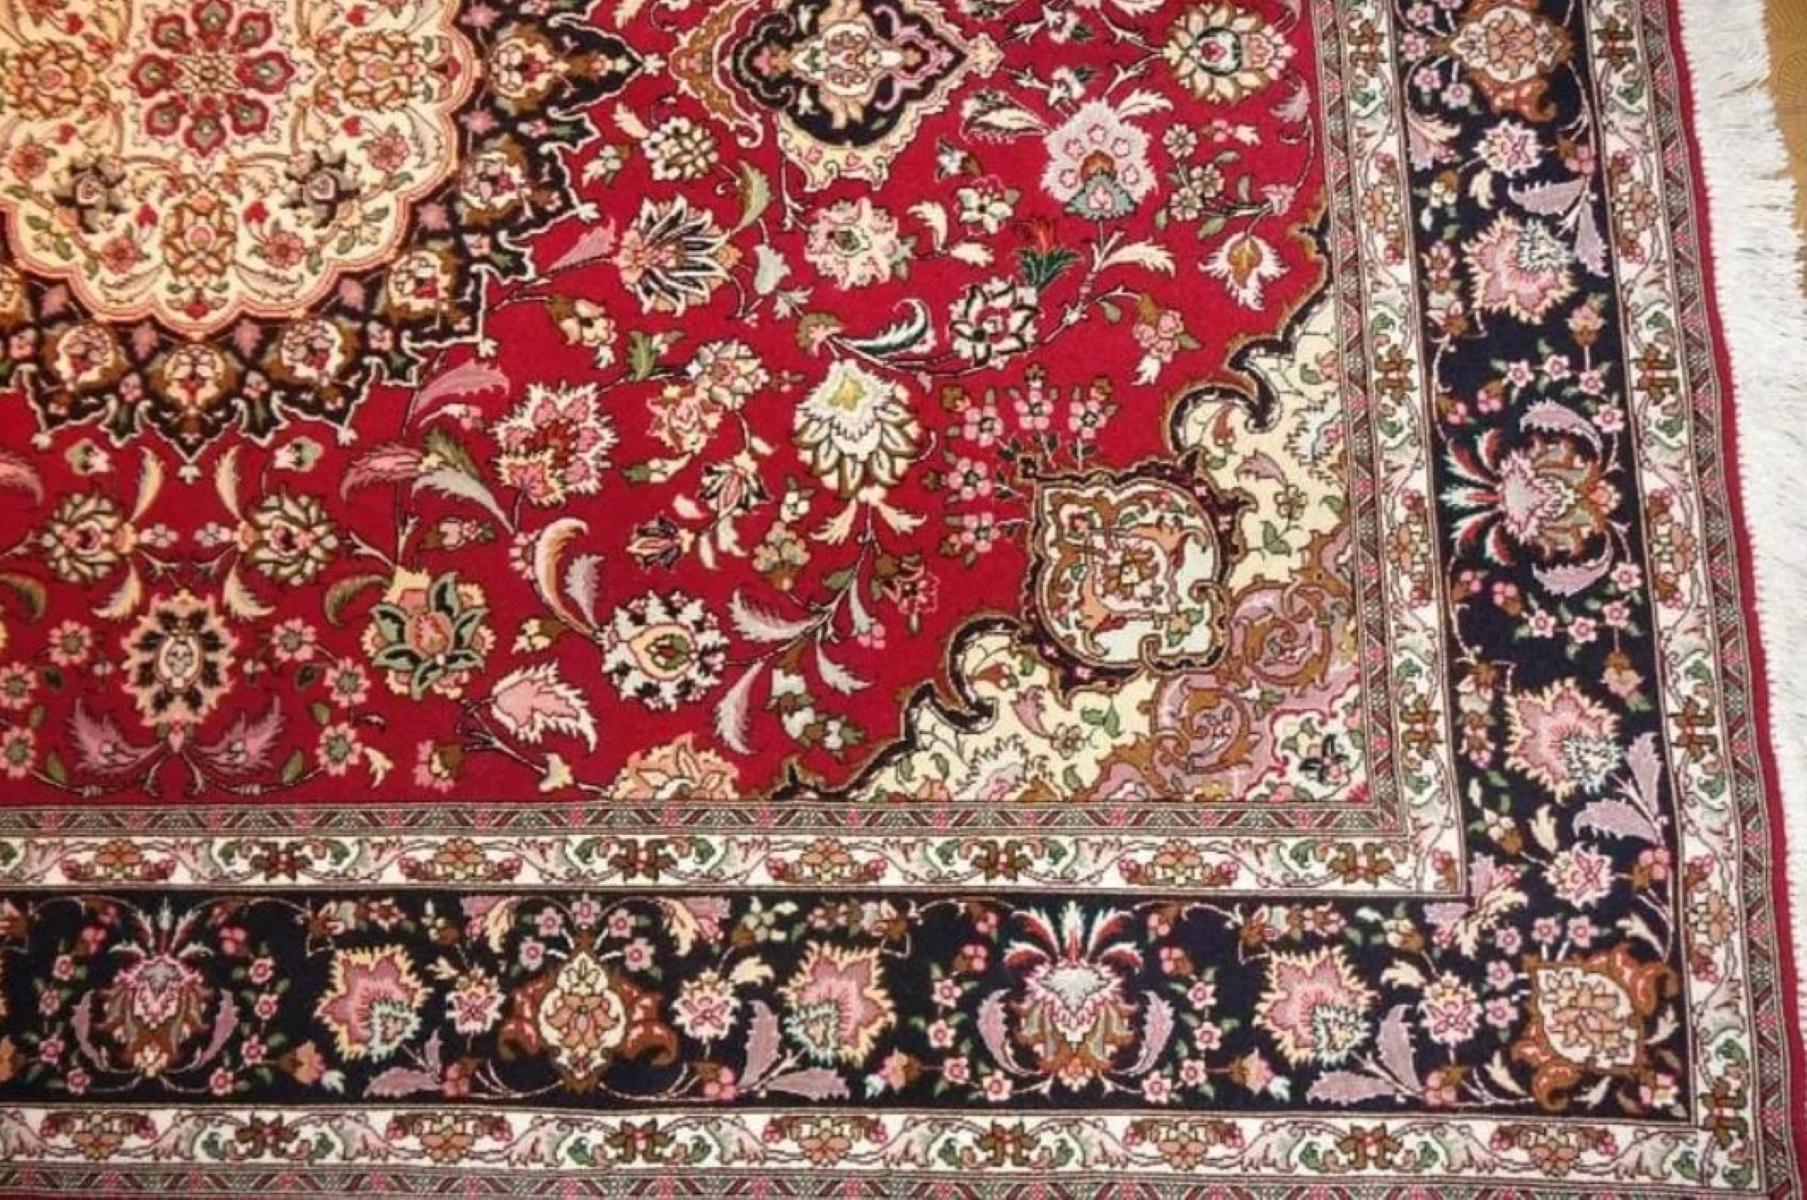 Very fine Persian Rug Tabriz 500 Knots per inch, Size 5 x 6.10  Silk and Silk foundation. Around 2,000,000 knots tied by hand one by one. It takes a year and a half to complete this piece of art.